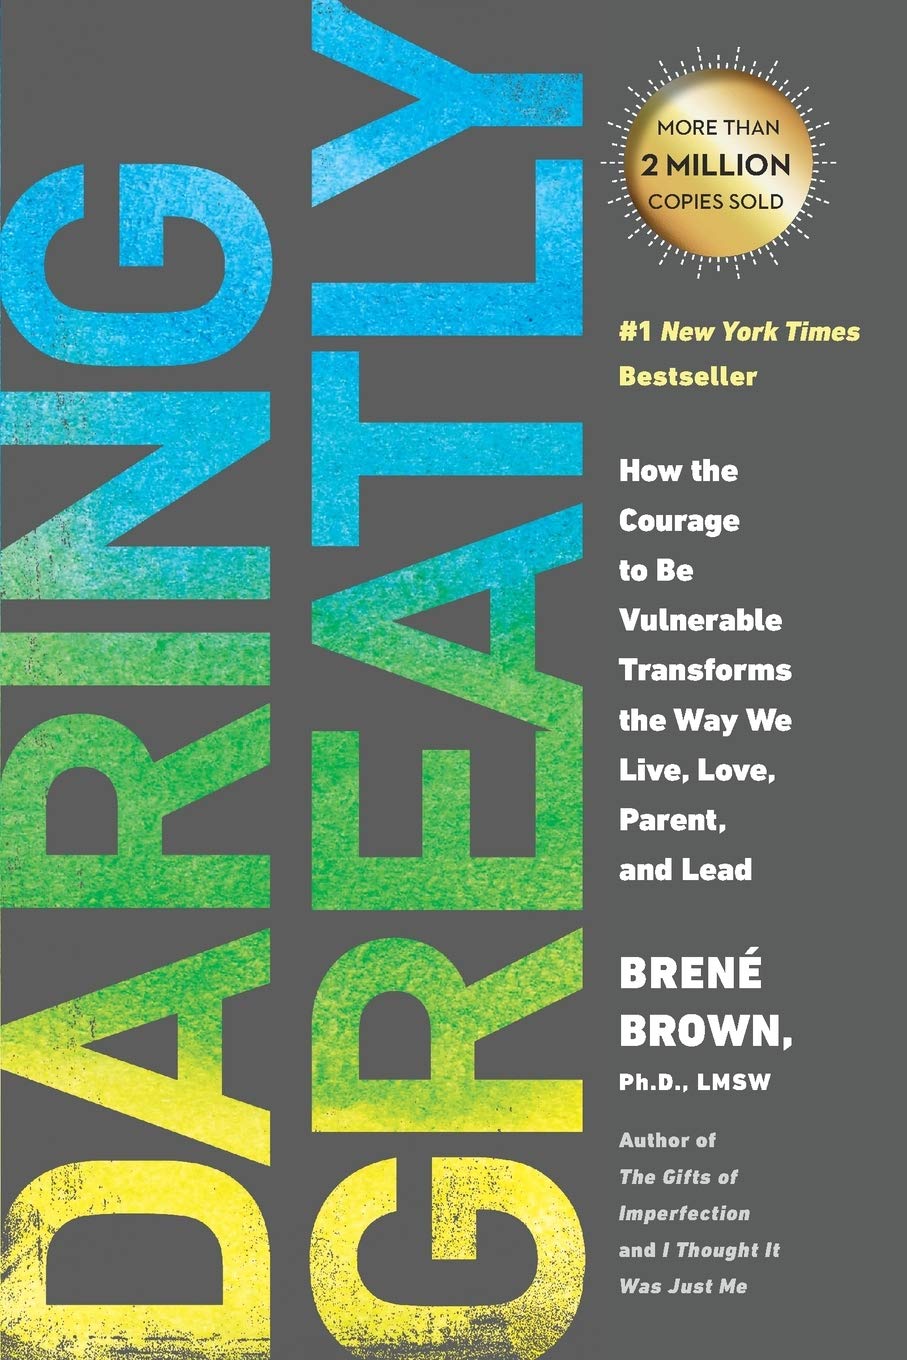 Daring Greatly. How the Courage to Be Vulnerable Transforms the Way We Live, Love, Parent, and Lead by Brené Brown